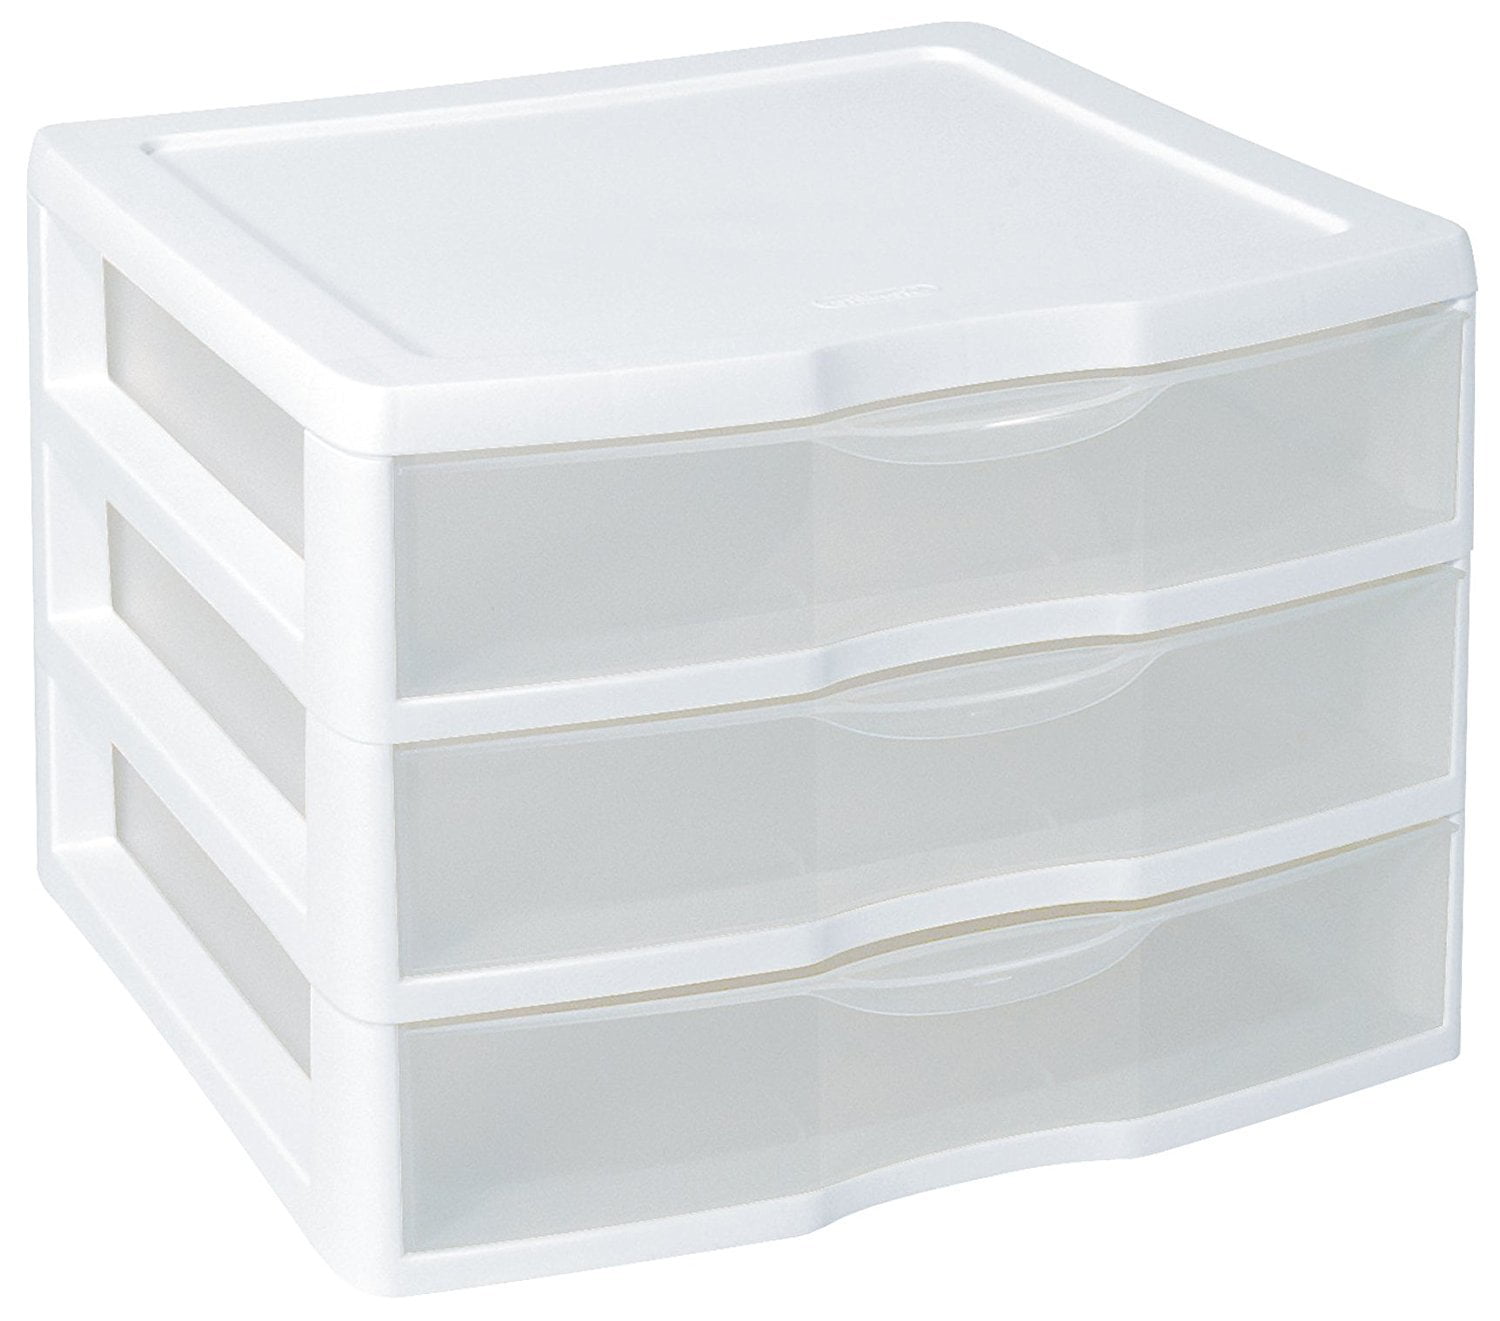 Sterilite 20738006 Small 3 Drawer Unit White Frame With Clear Drawers 6pack for sale online 